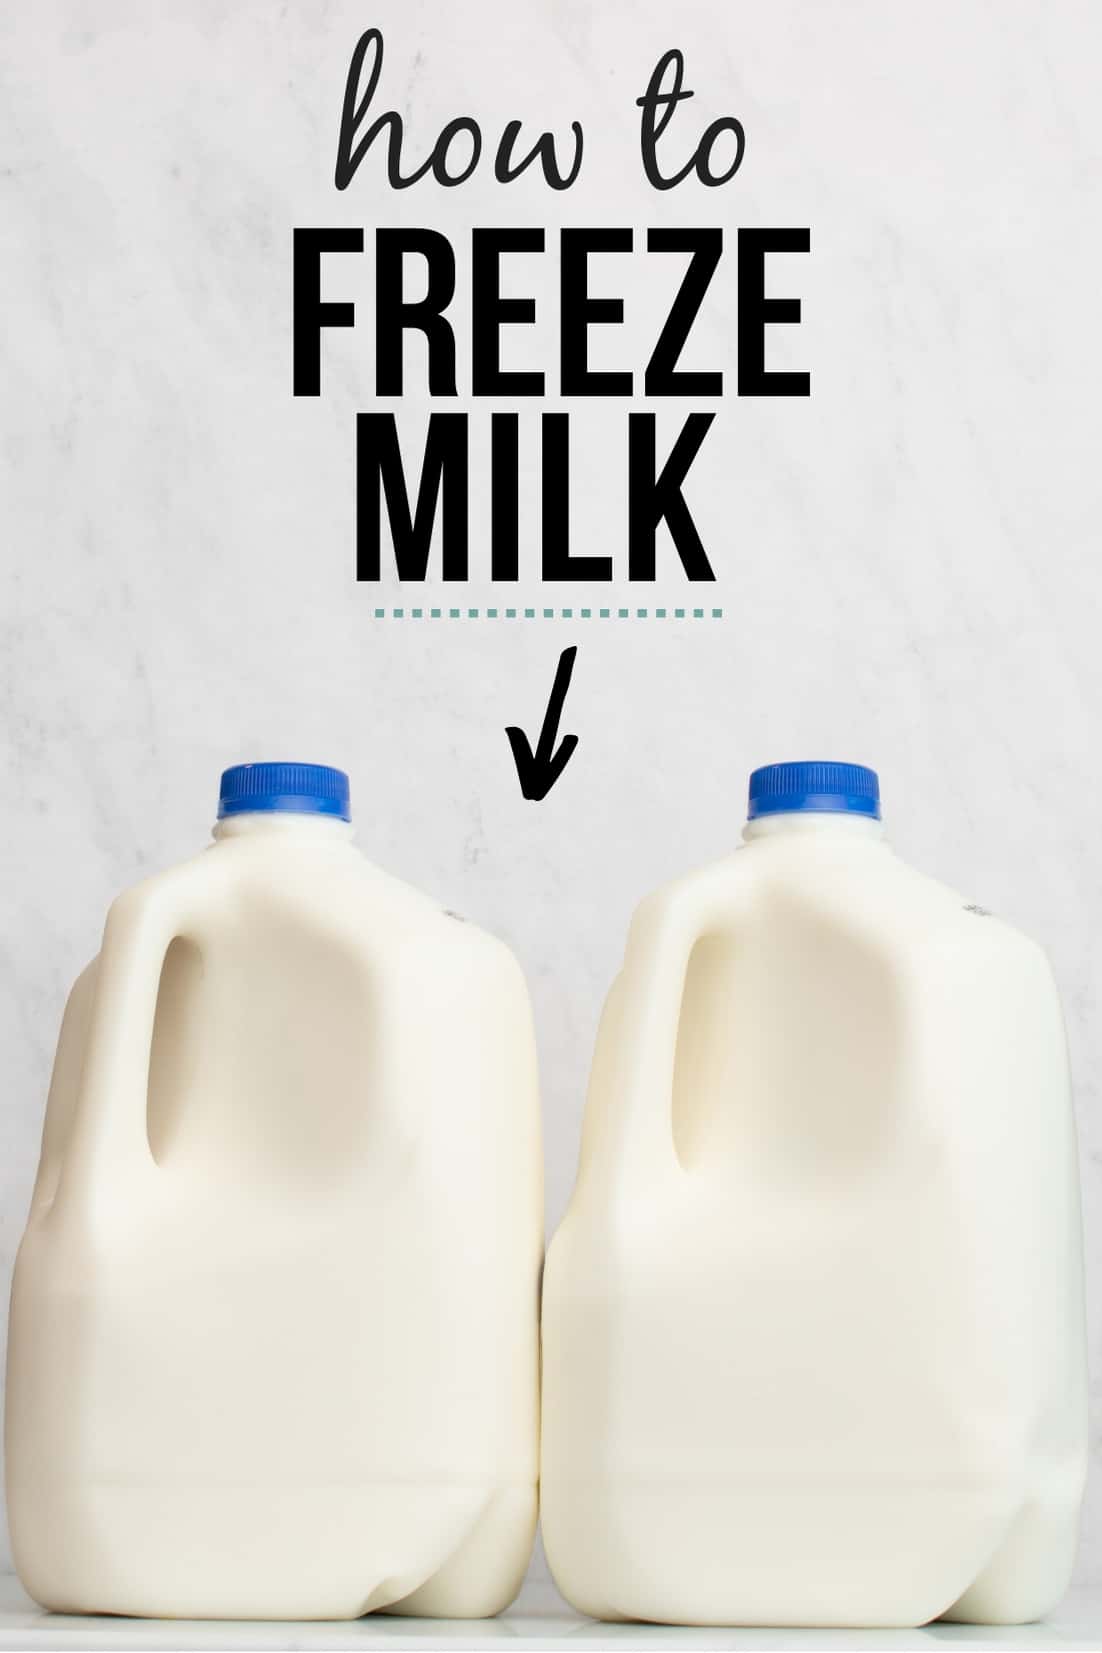 Can You Freeze Milk, and Should You? - Happy Money Saver